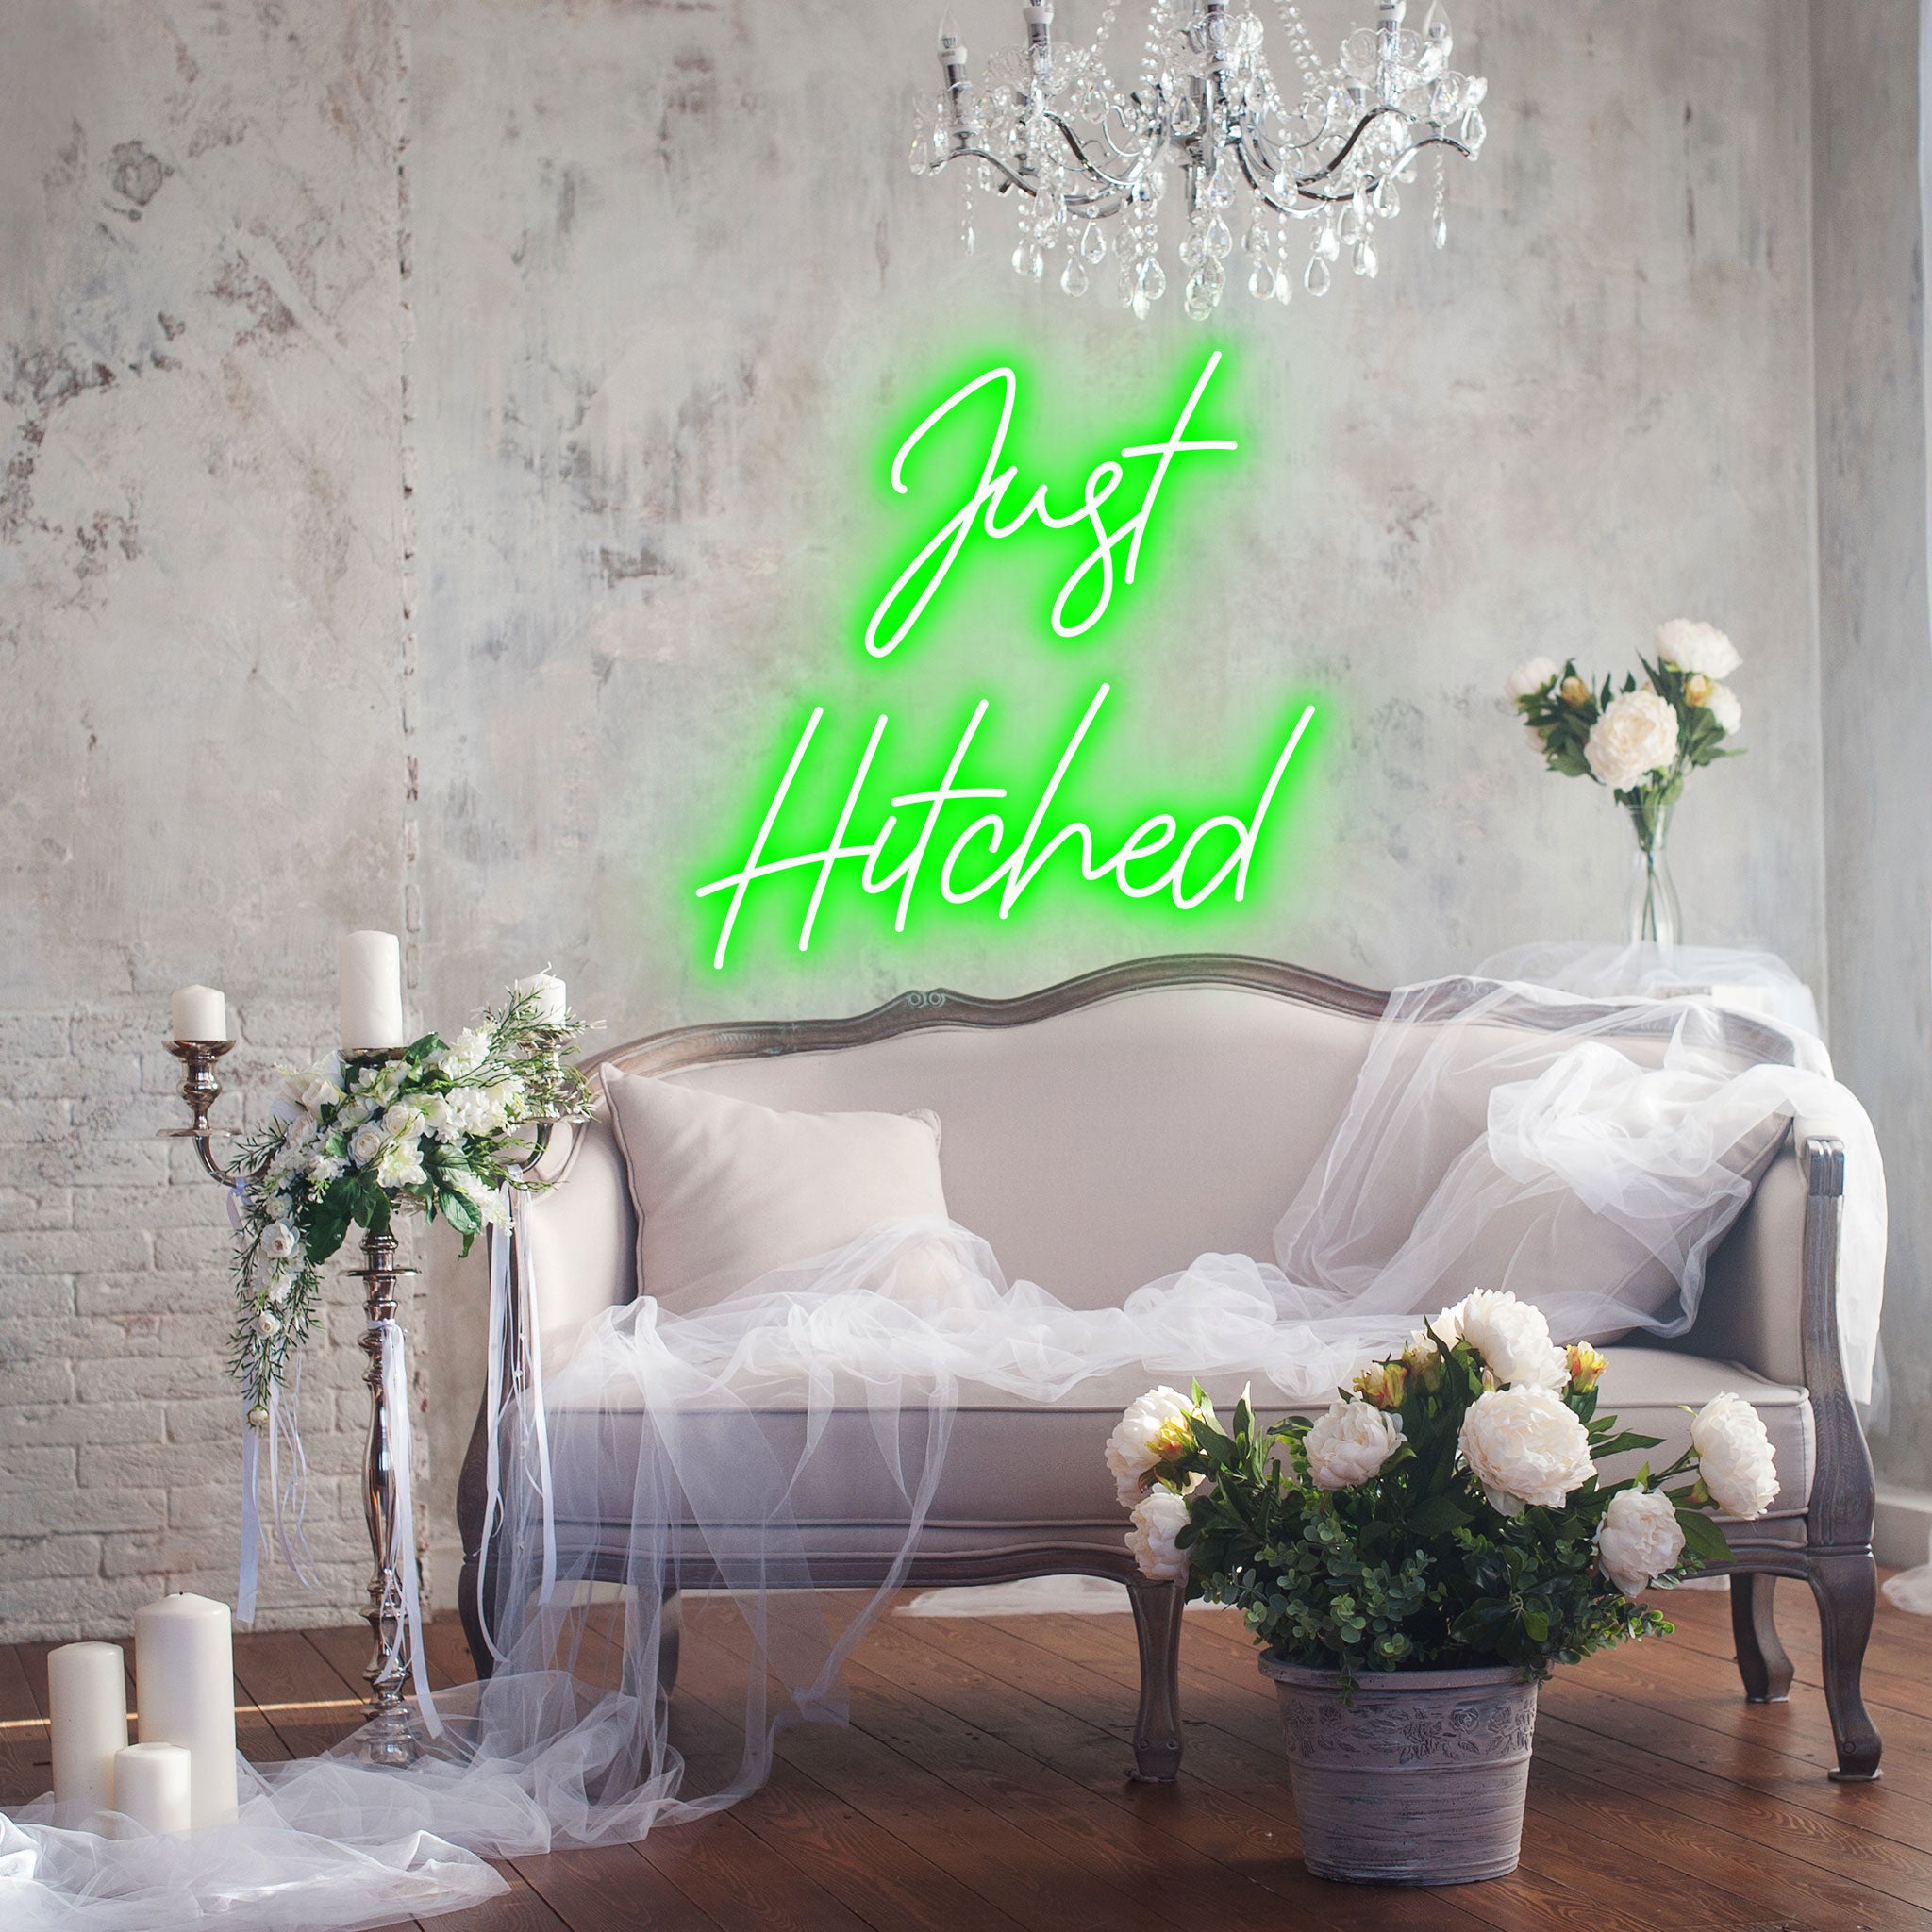 Just Hitched - Neon Sign - Wedding Engagement Event